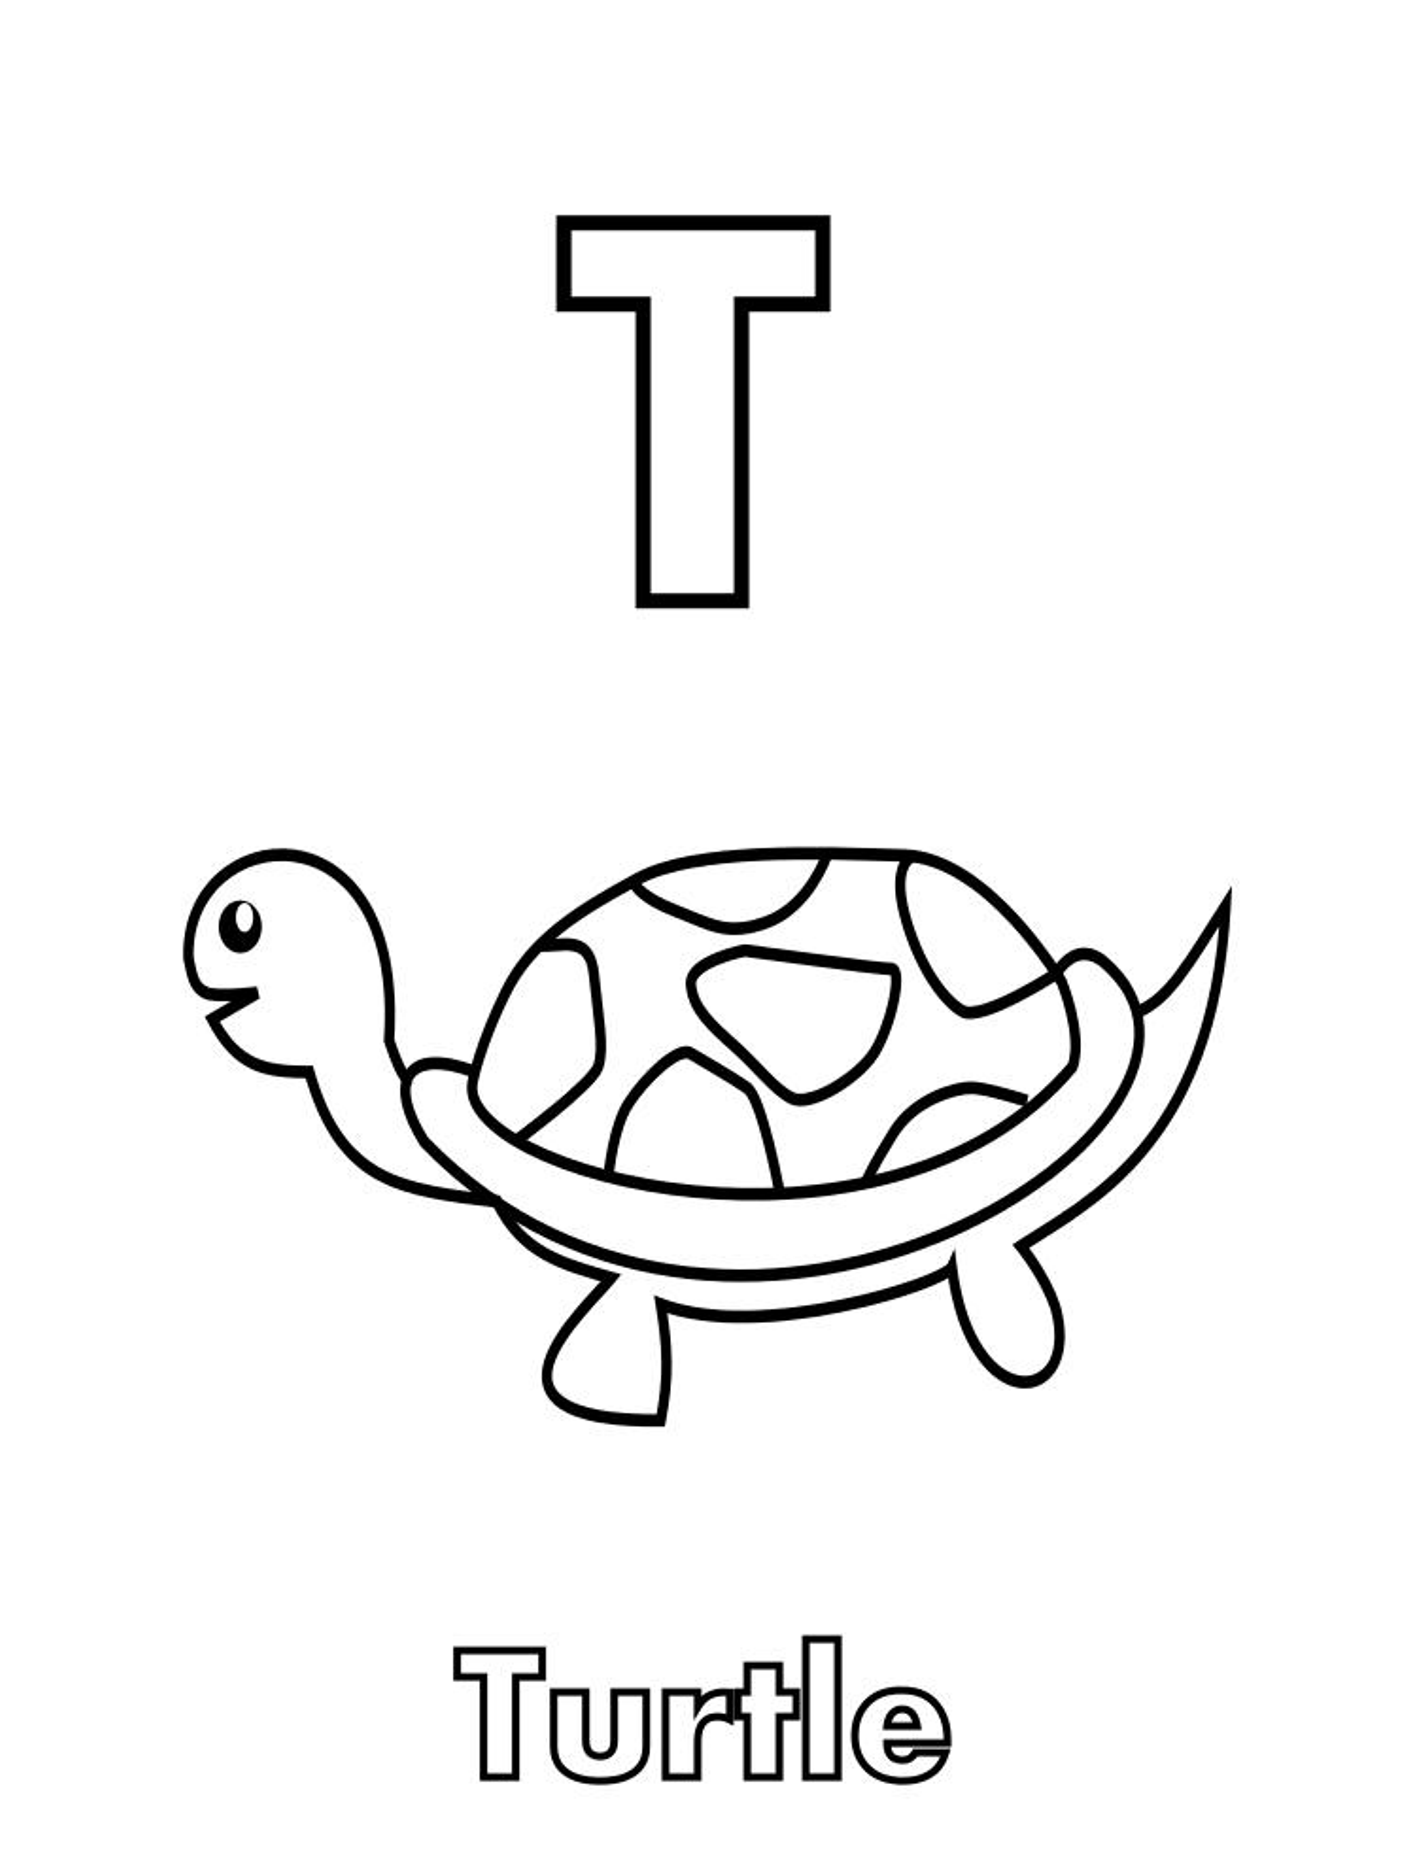 Turtle Coloring Pages : Turtle And Teacup Alphabet Coloring Page ...